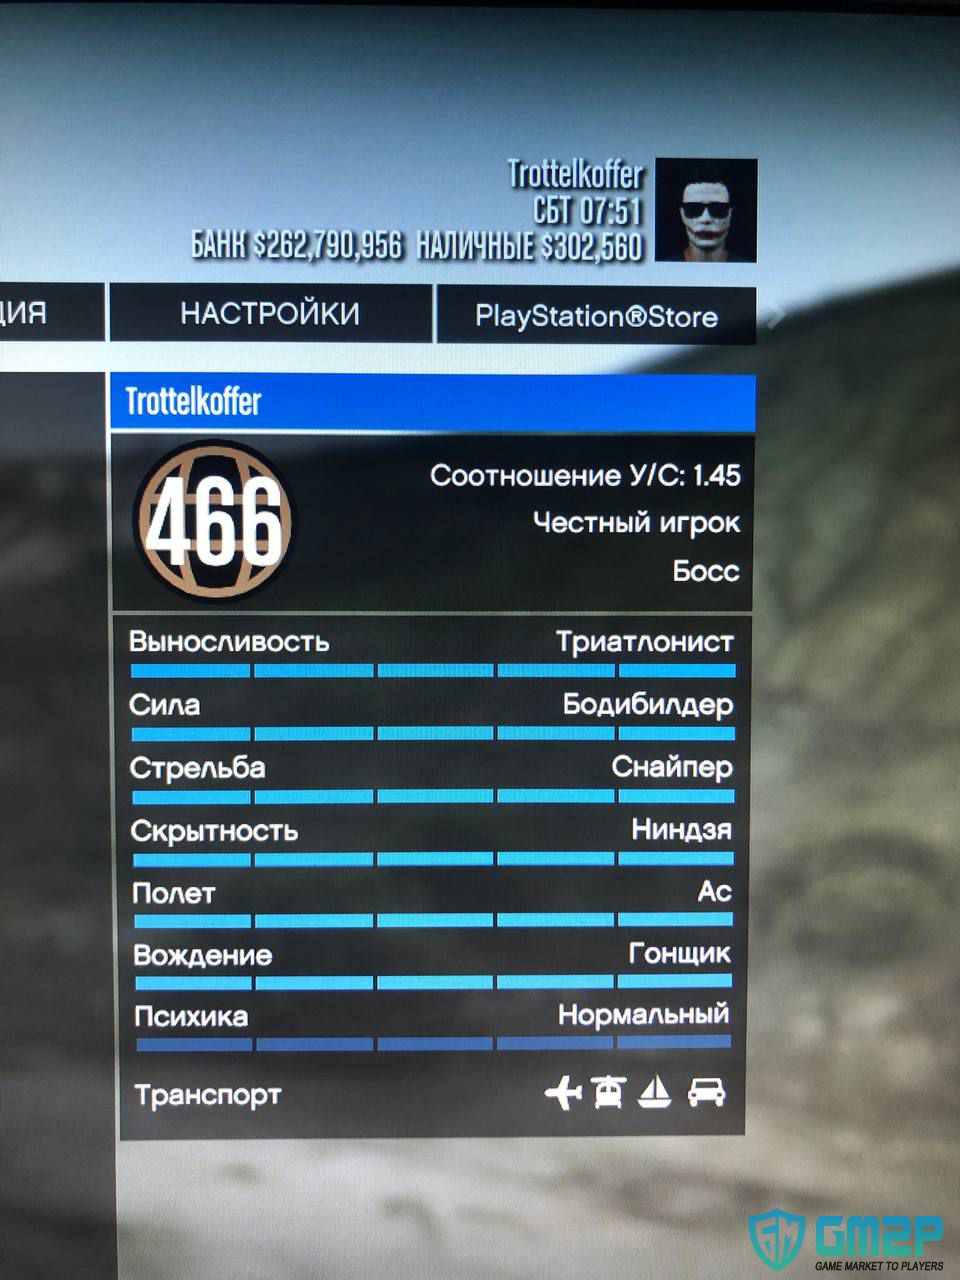 Buy GTA 5 MODDED ACCOUNT  1 Billion in Total Assets (Xbox One) - XBOX  Account - GLOBAL - Cheap - !